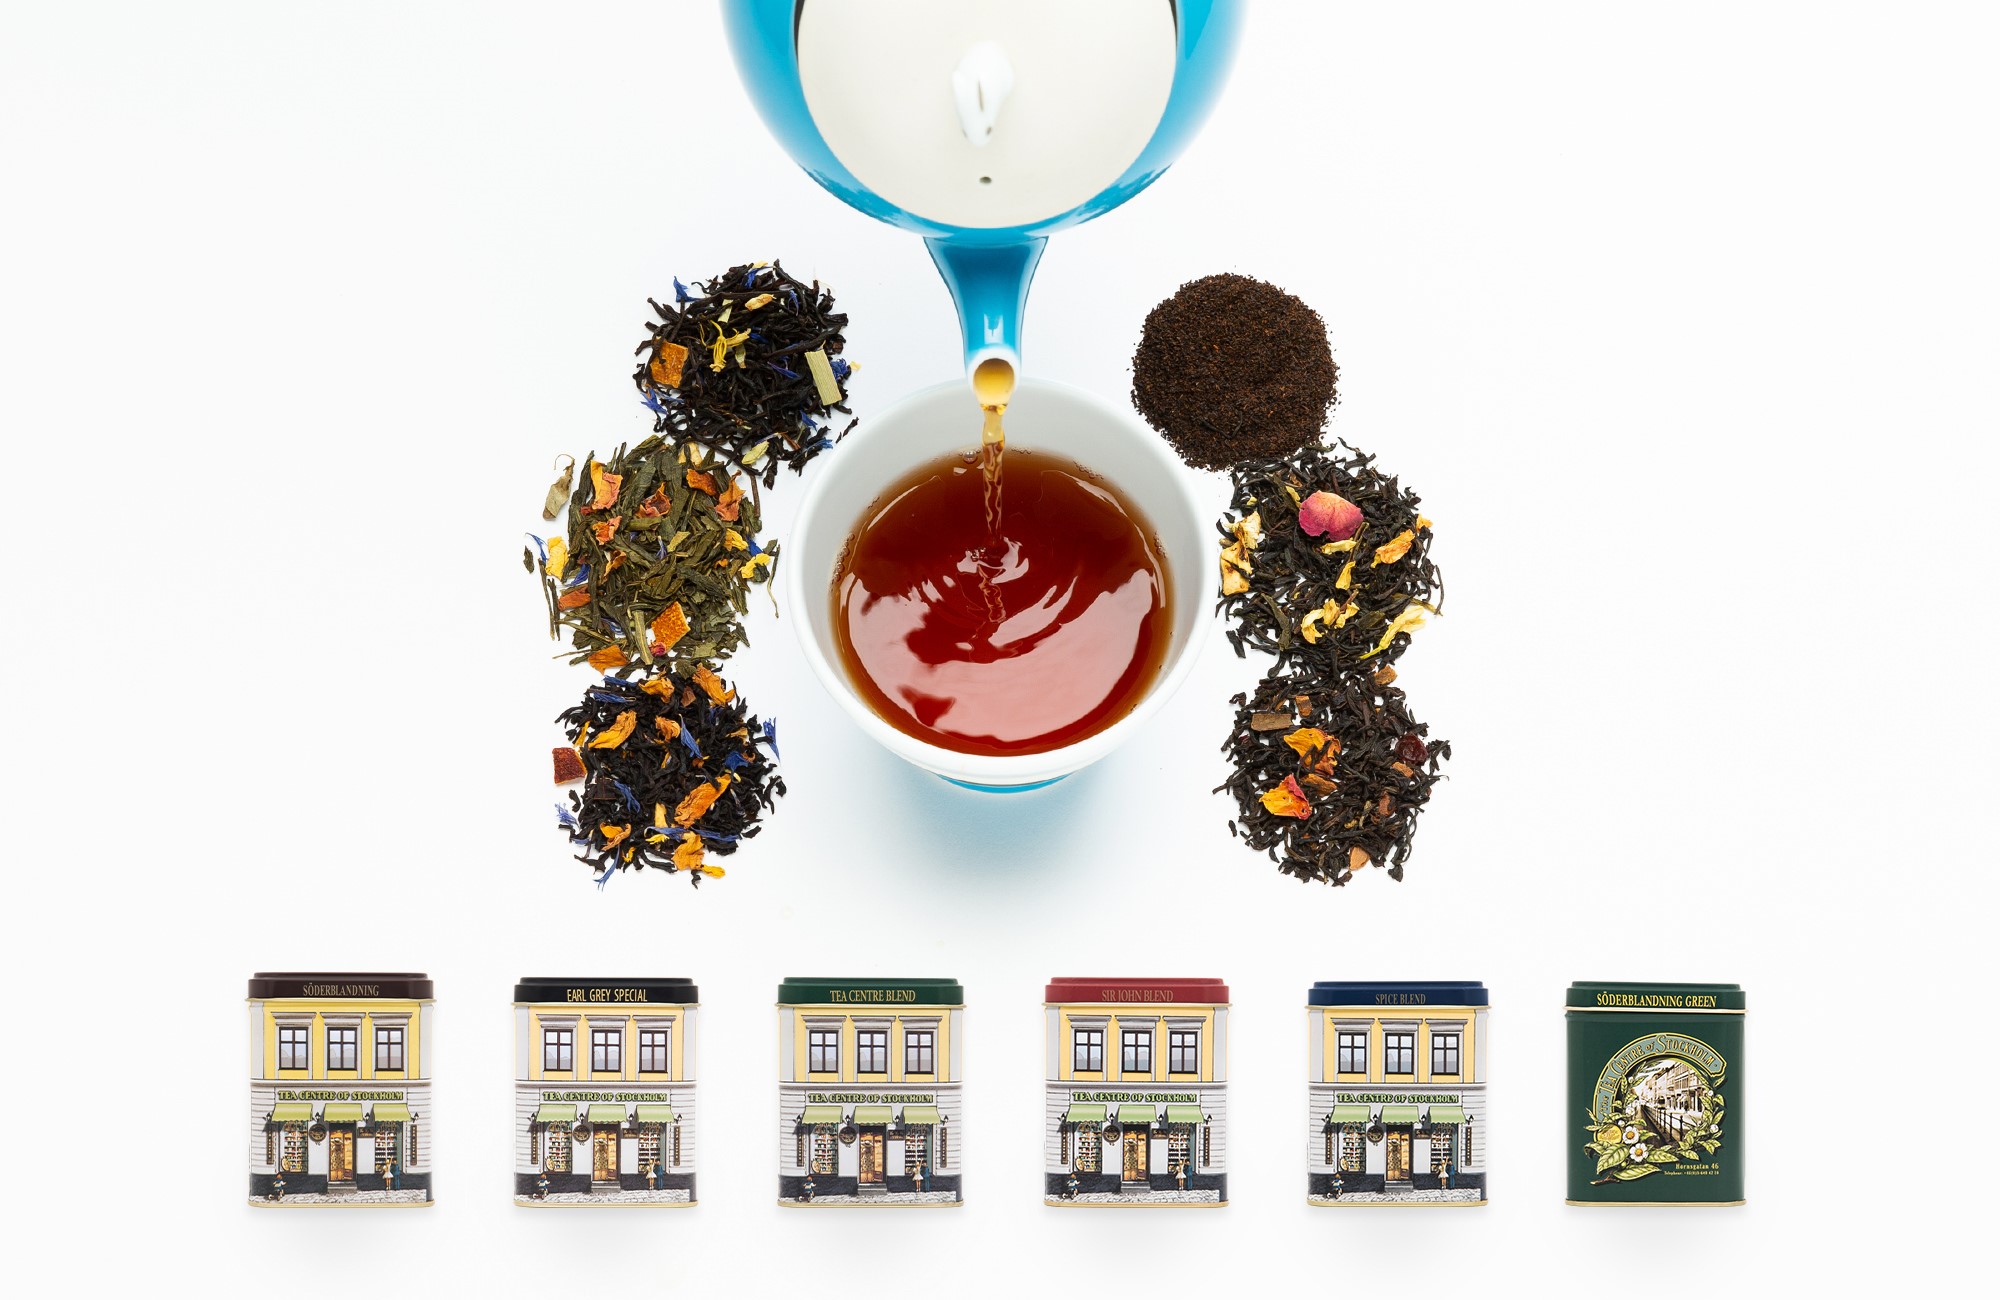 Member Introduction: FORGOOD~ A Design Consultancy & Distributor of High-End Swedish Tea